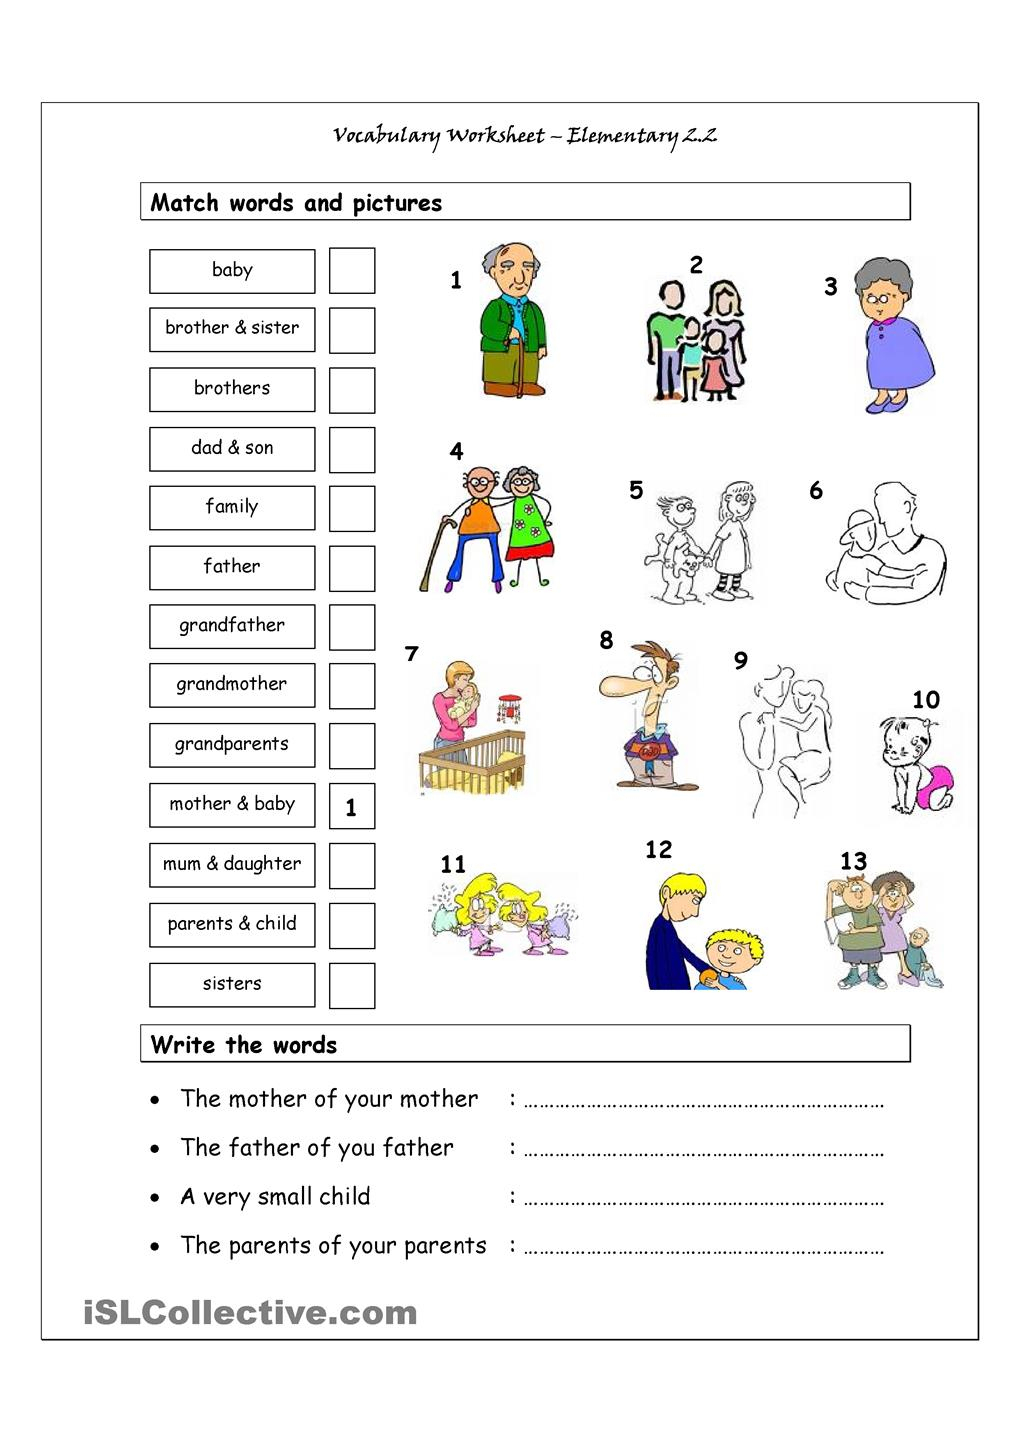 Preschool English Worksheets – With Activities Printable Also - Free Printable Classroom Worksheets